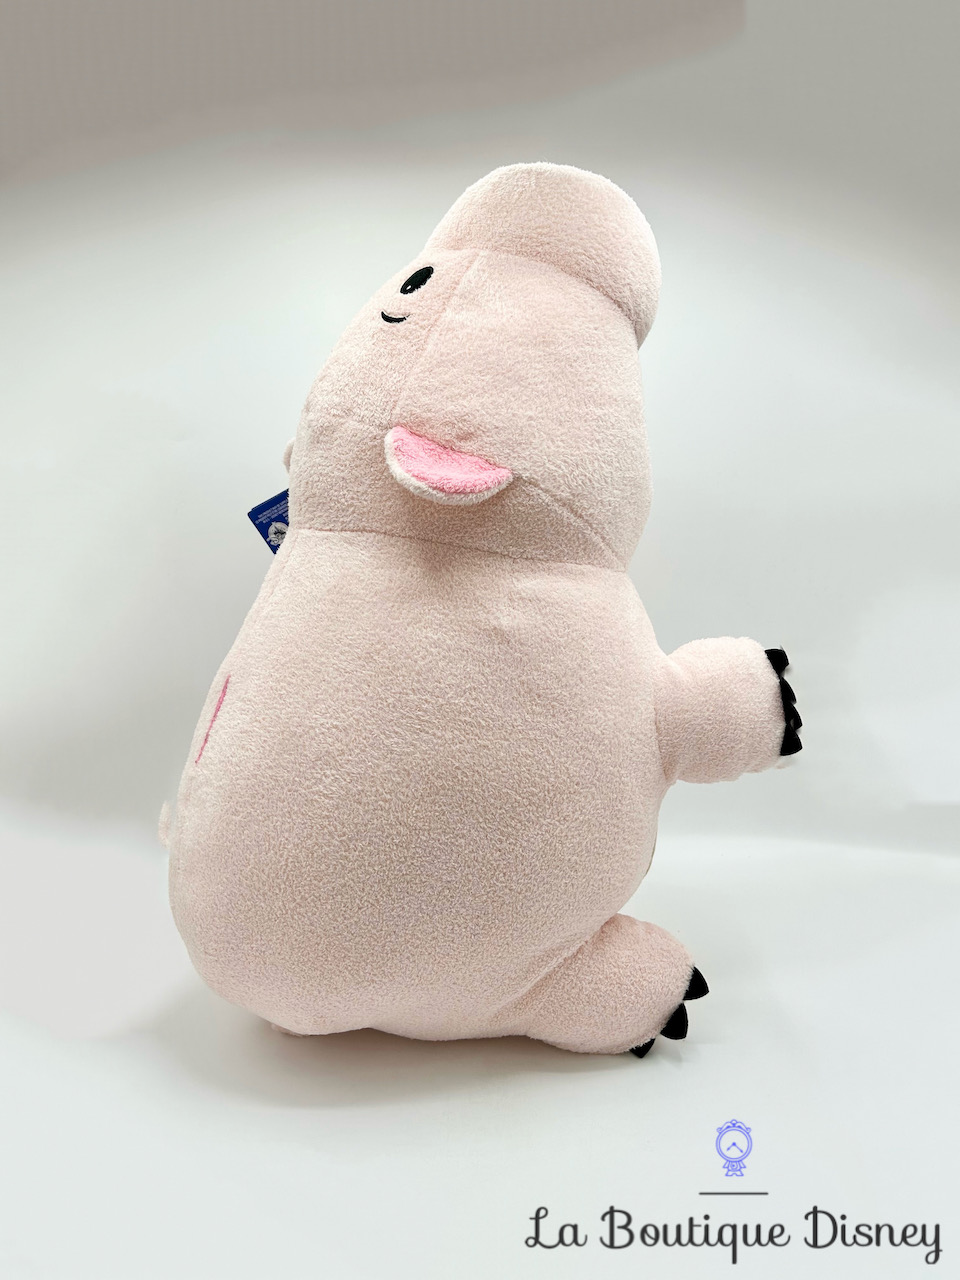 peluche-bayonne-xxl-cochon-rose-toy-story-disney-store-grand-format-grande-taille-5